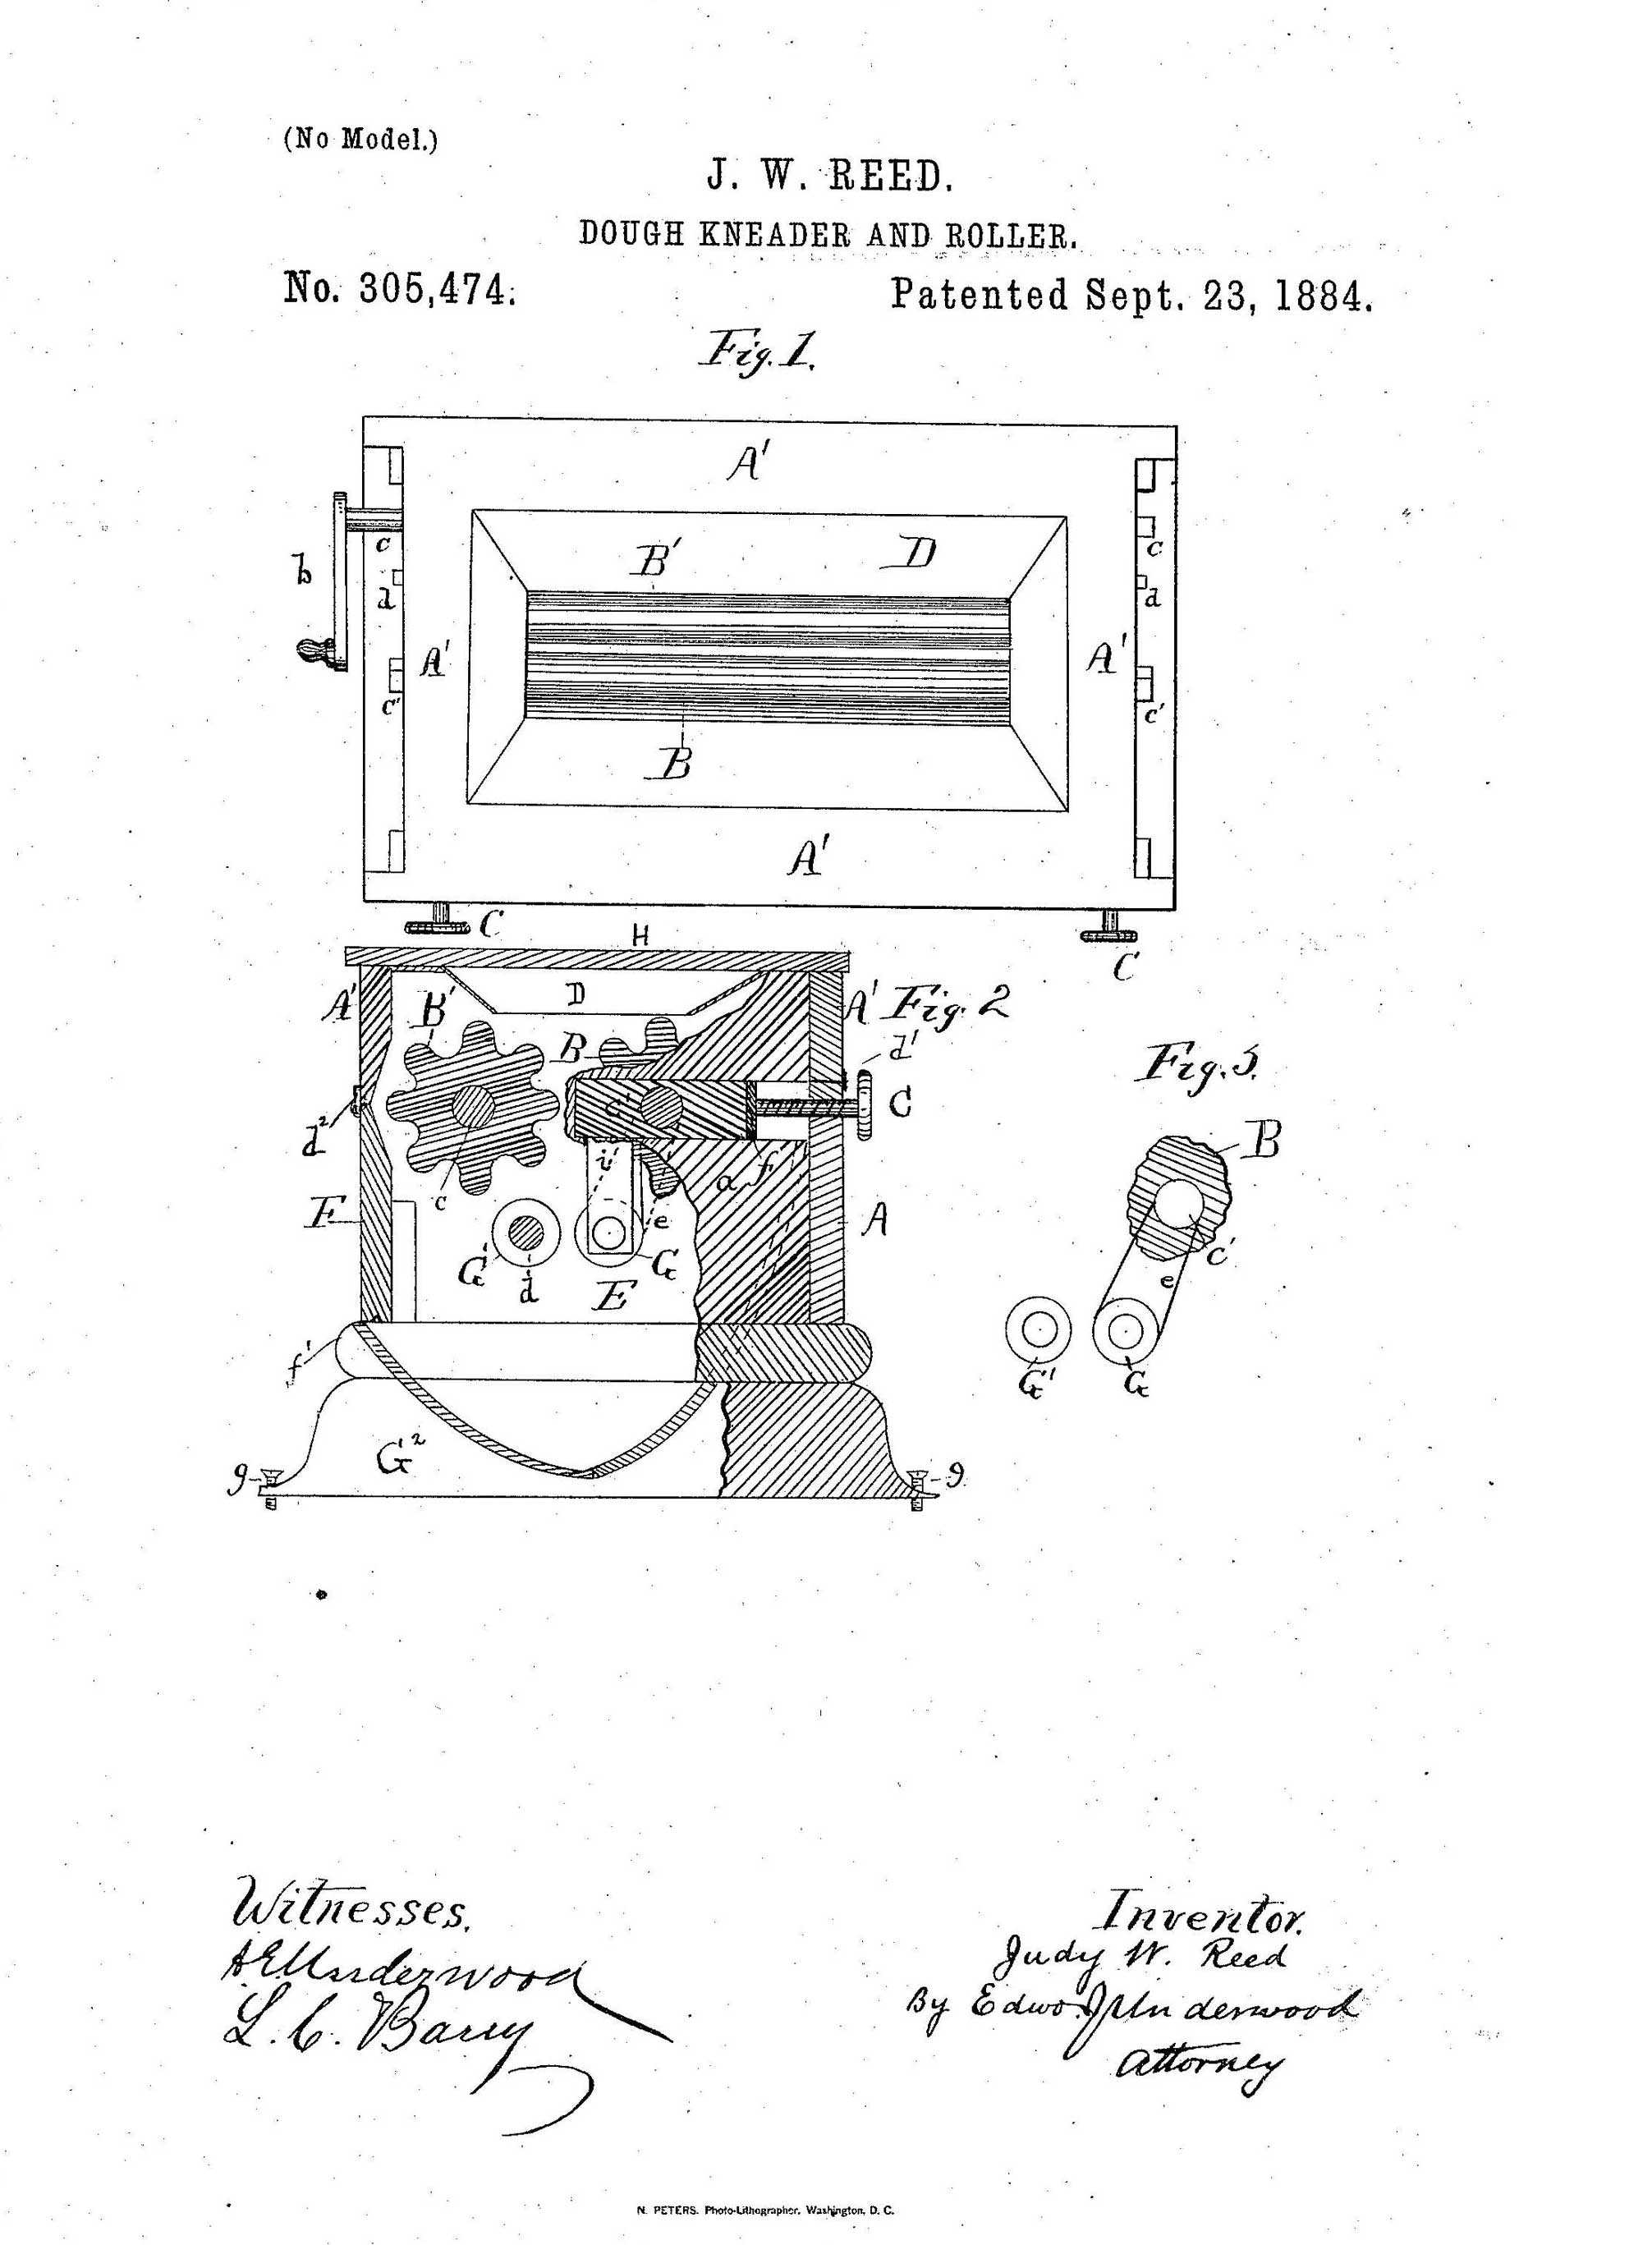 A 2 diagrams of a top view and side view of the Dough Kneader and Roller from the patent.